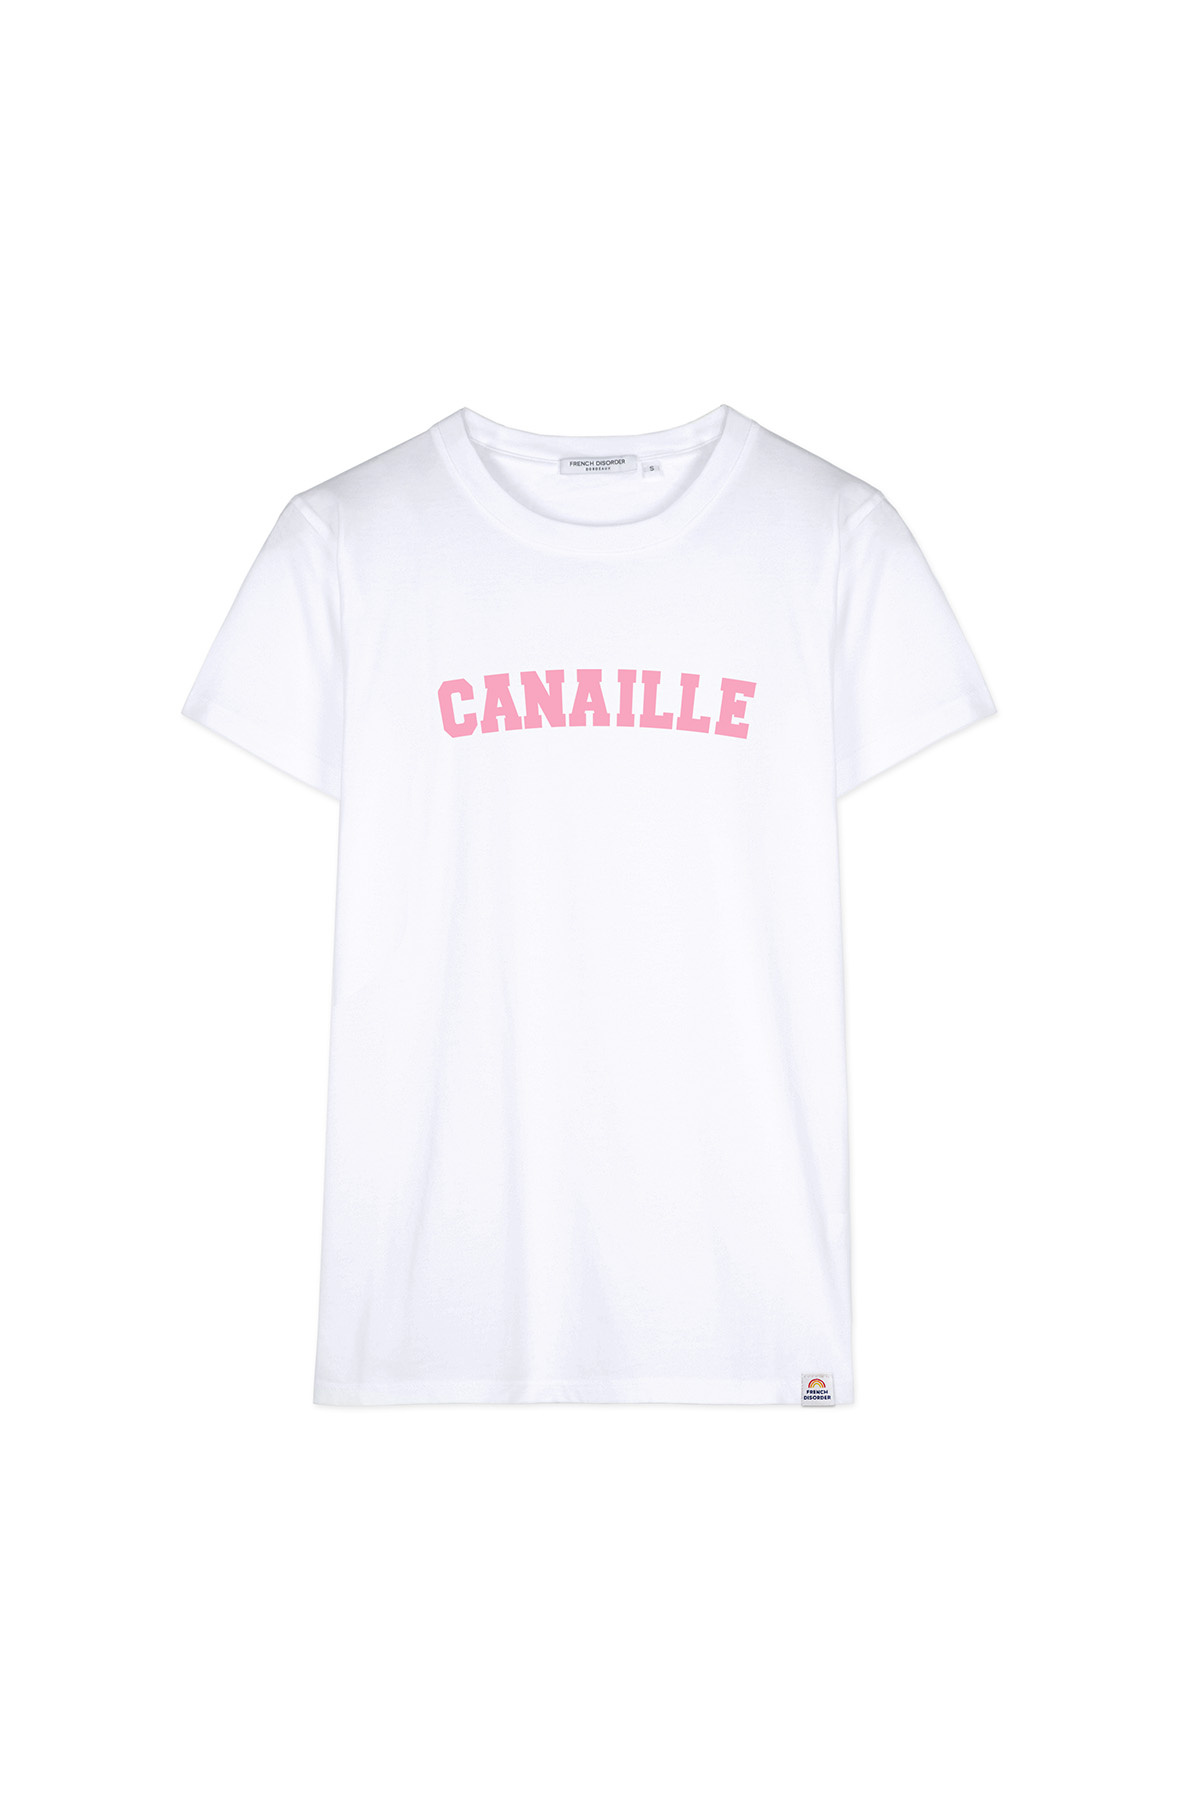 Tshirt CANAILLE